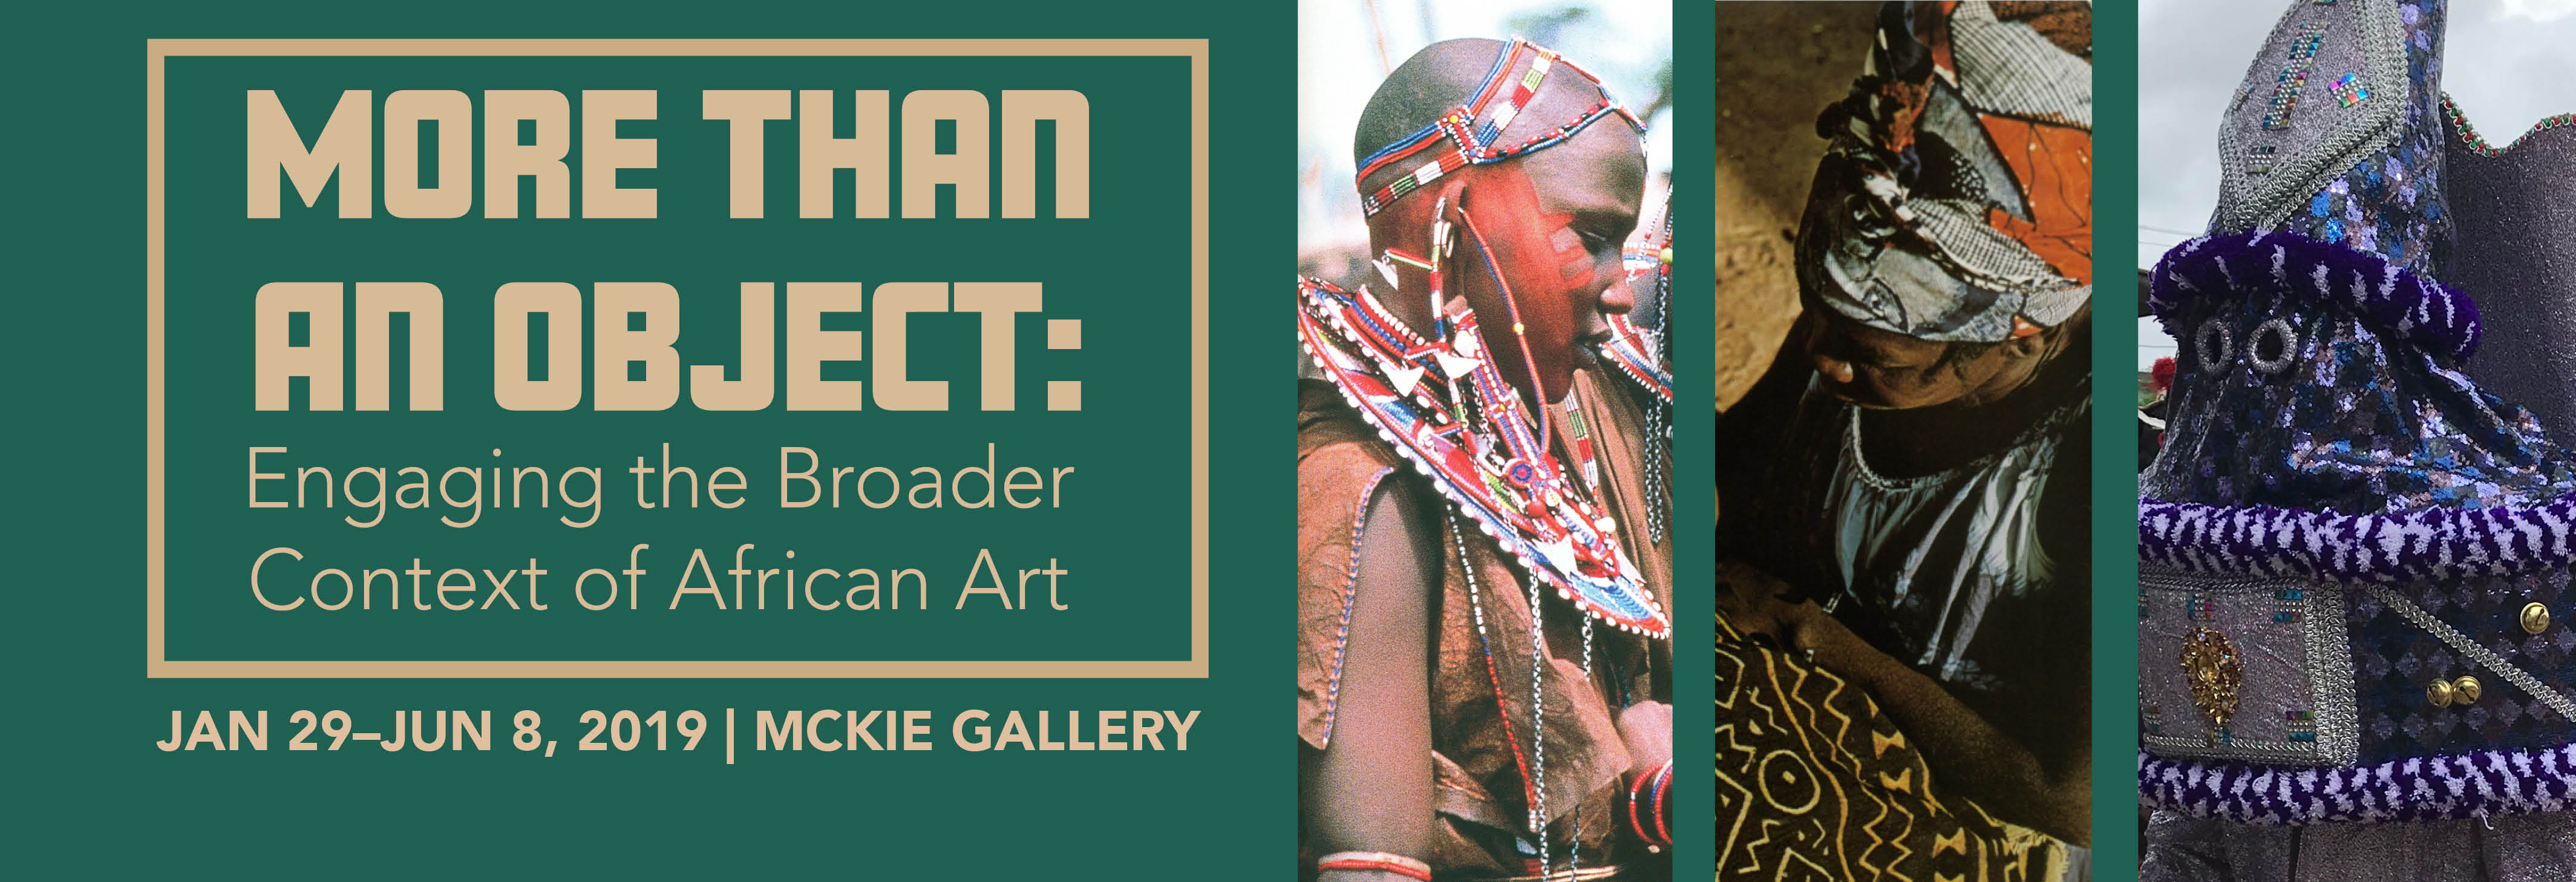 More than an Object exhibition open Jan 29-June 8, 2019